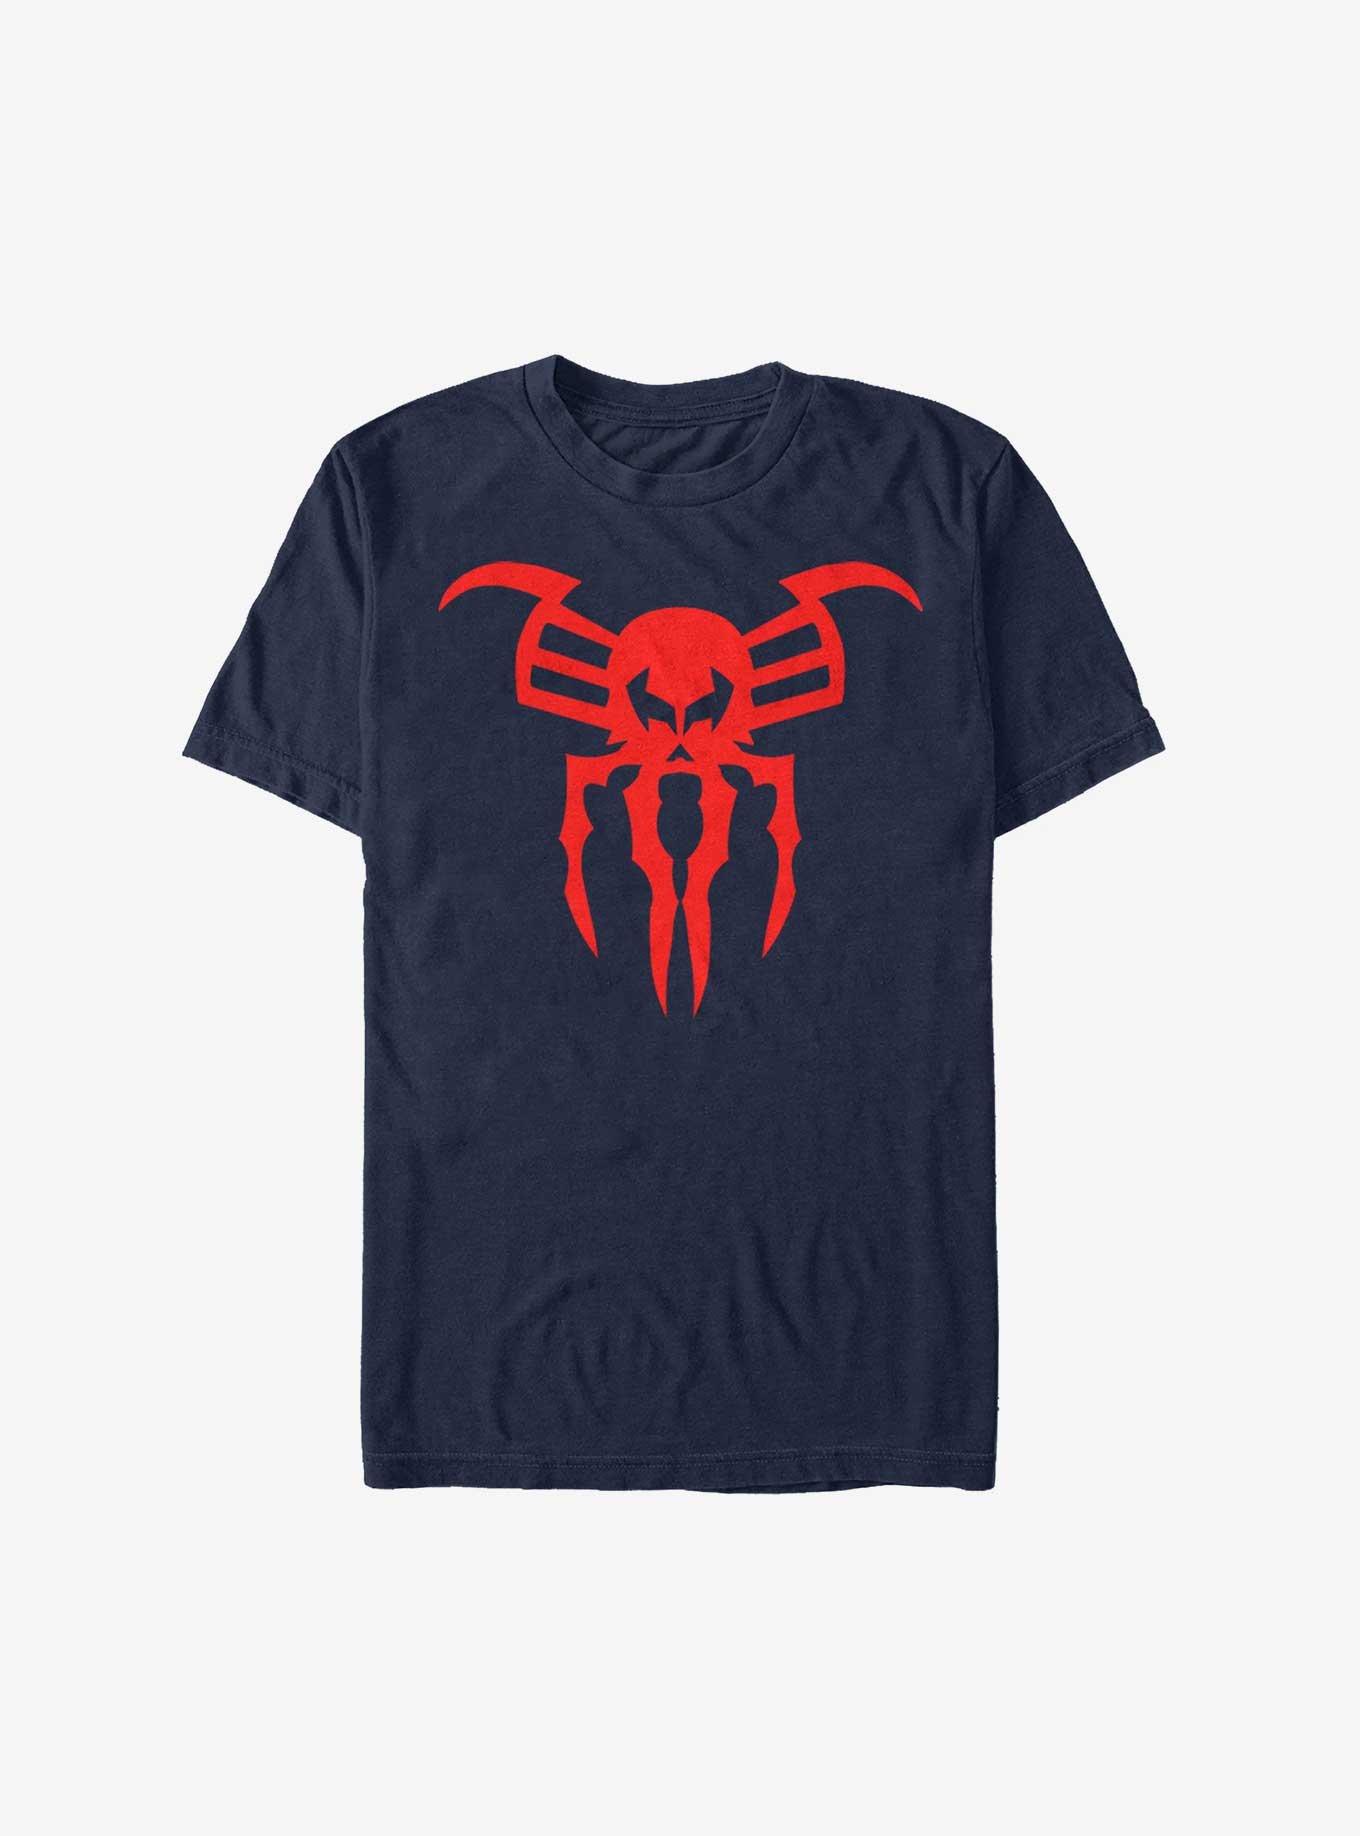 Extra Soft Marvel Spider-Man 2099 Icon T-Shirt | Hot Topic